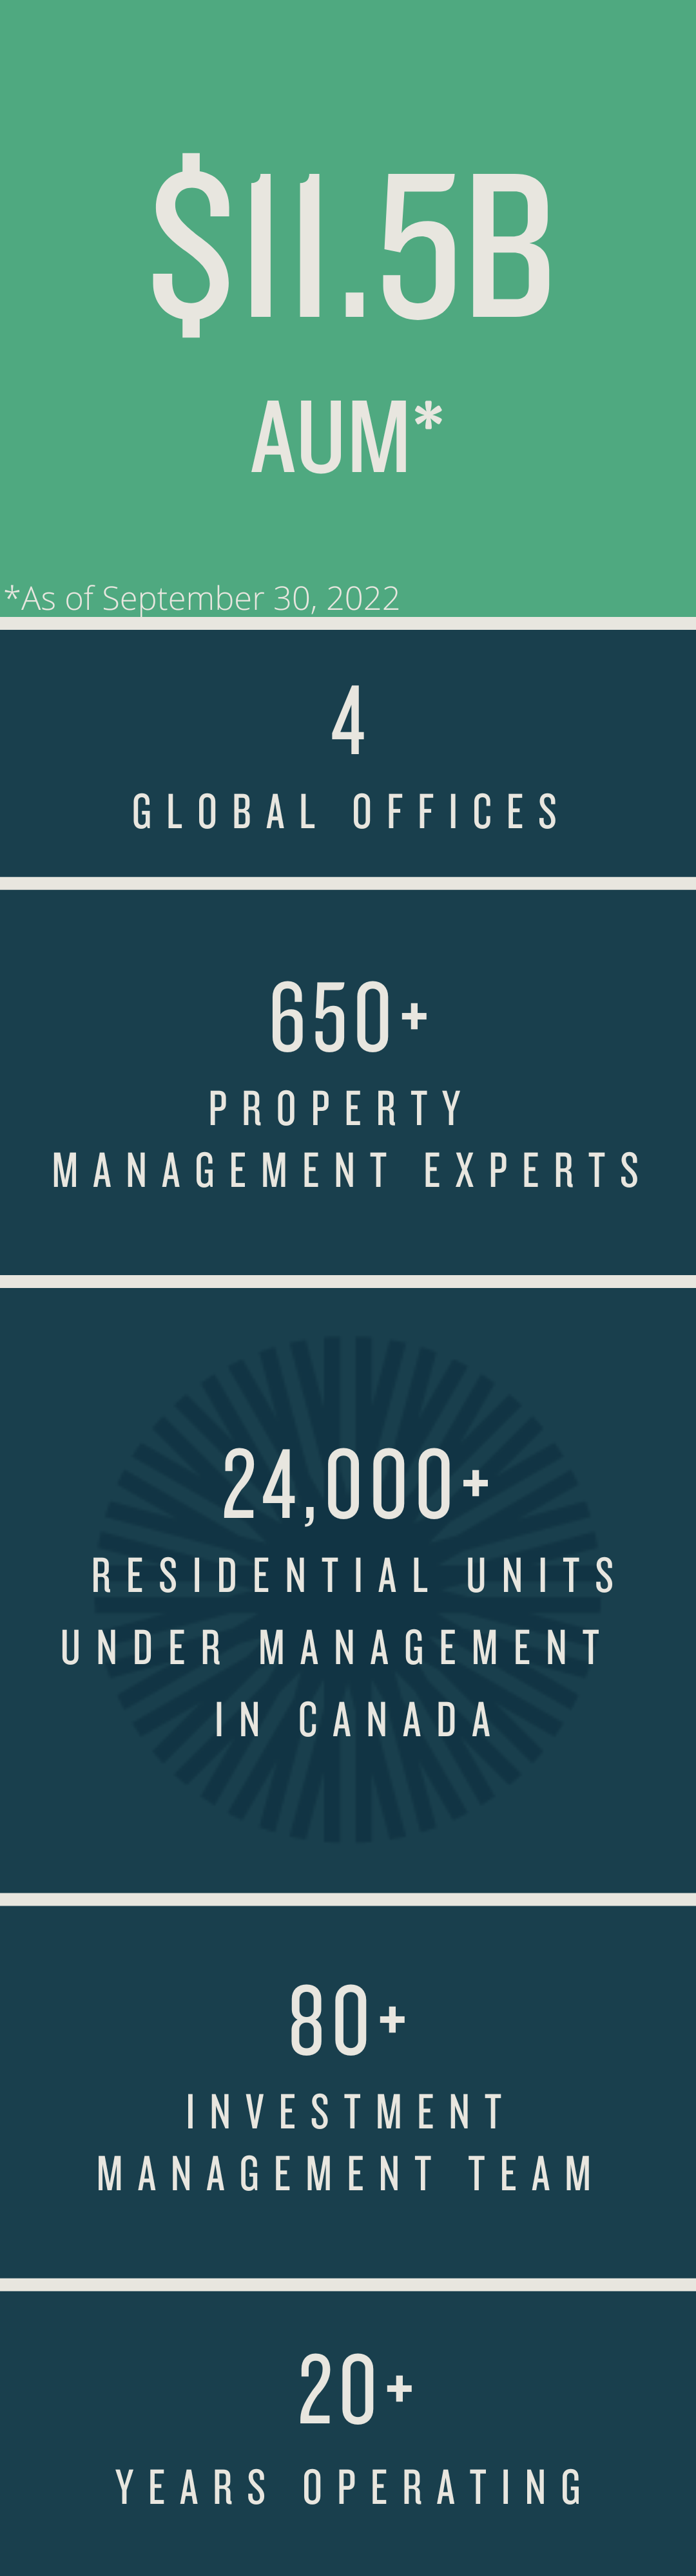 AUM 11.6Billion; 4 Global offices, 20+ year operating; Fully Integrated platform, 80+ investment management team; 650+ property management experts; 23,000+ residential units under management in Canada; as of September 30, 2022.